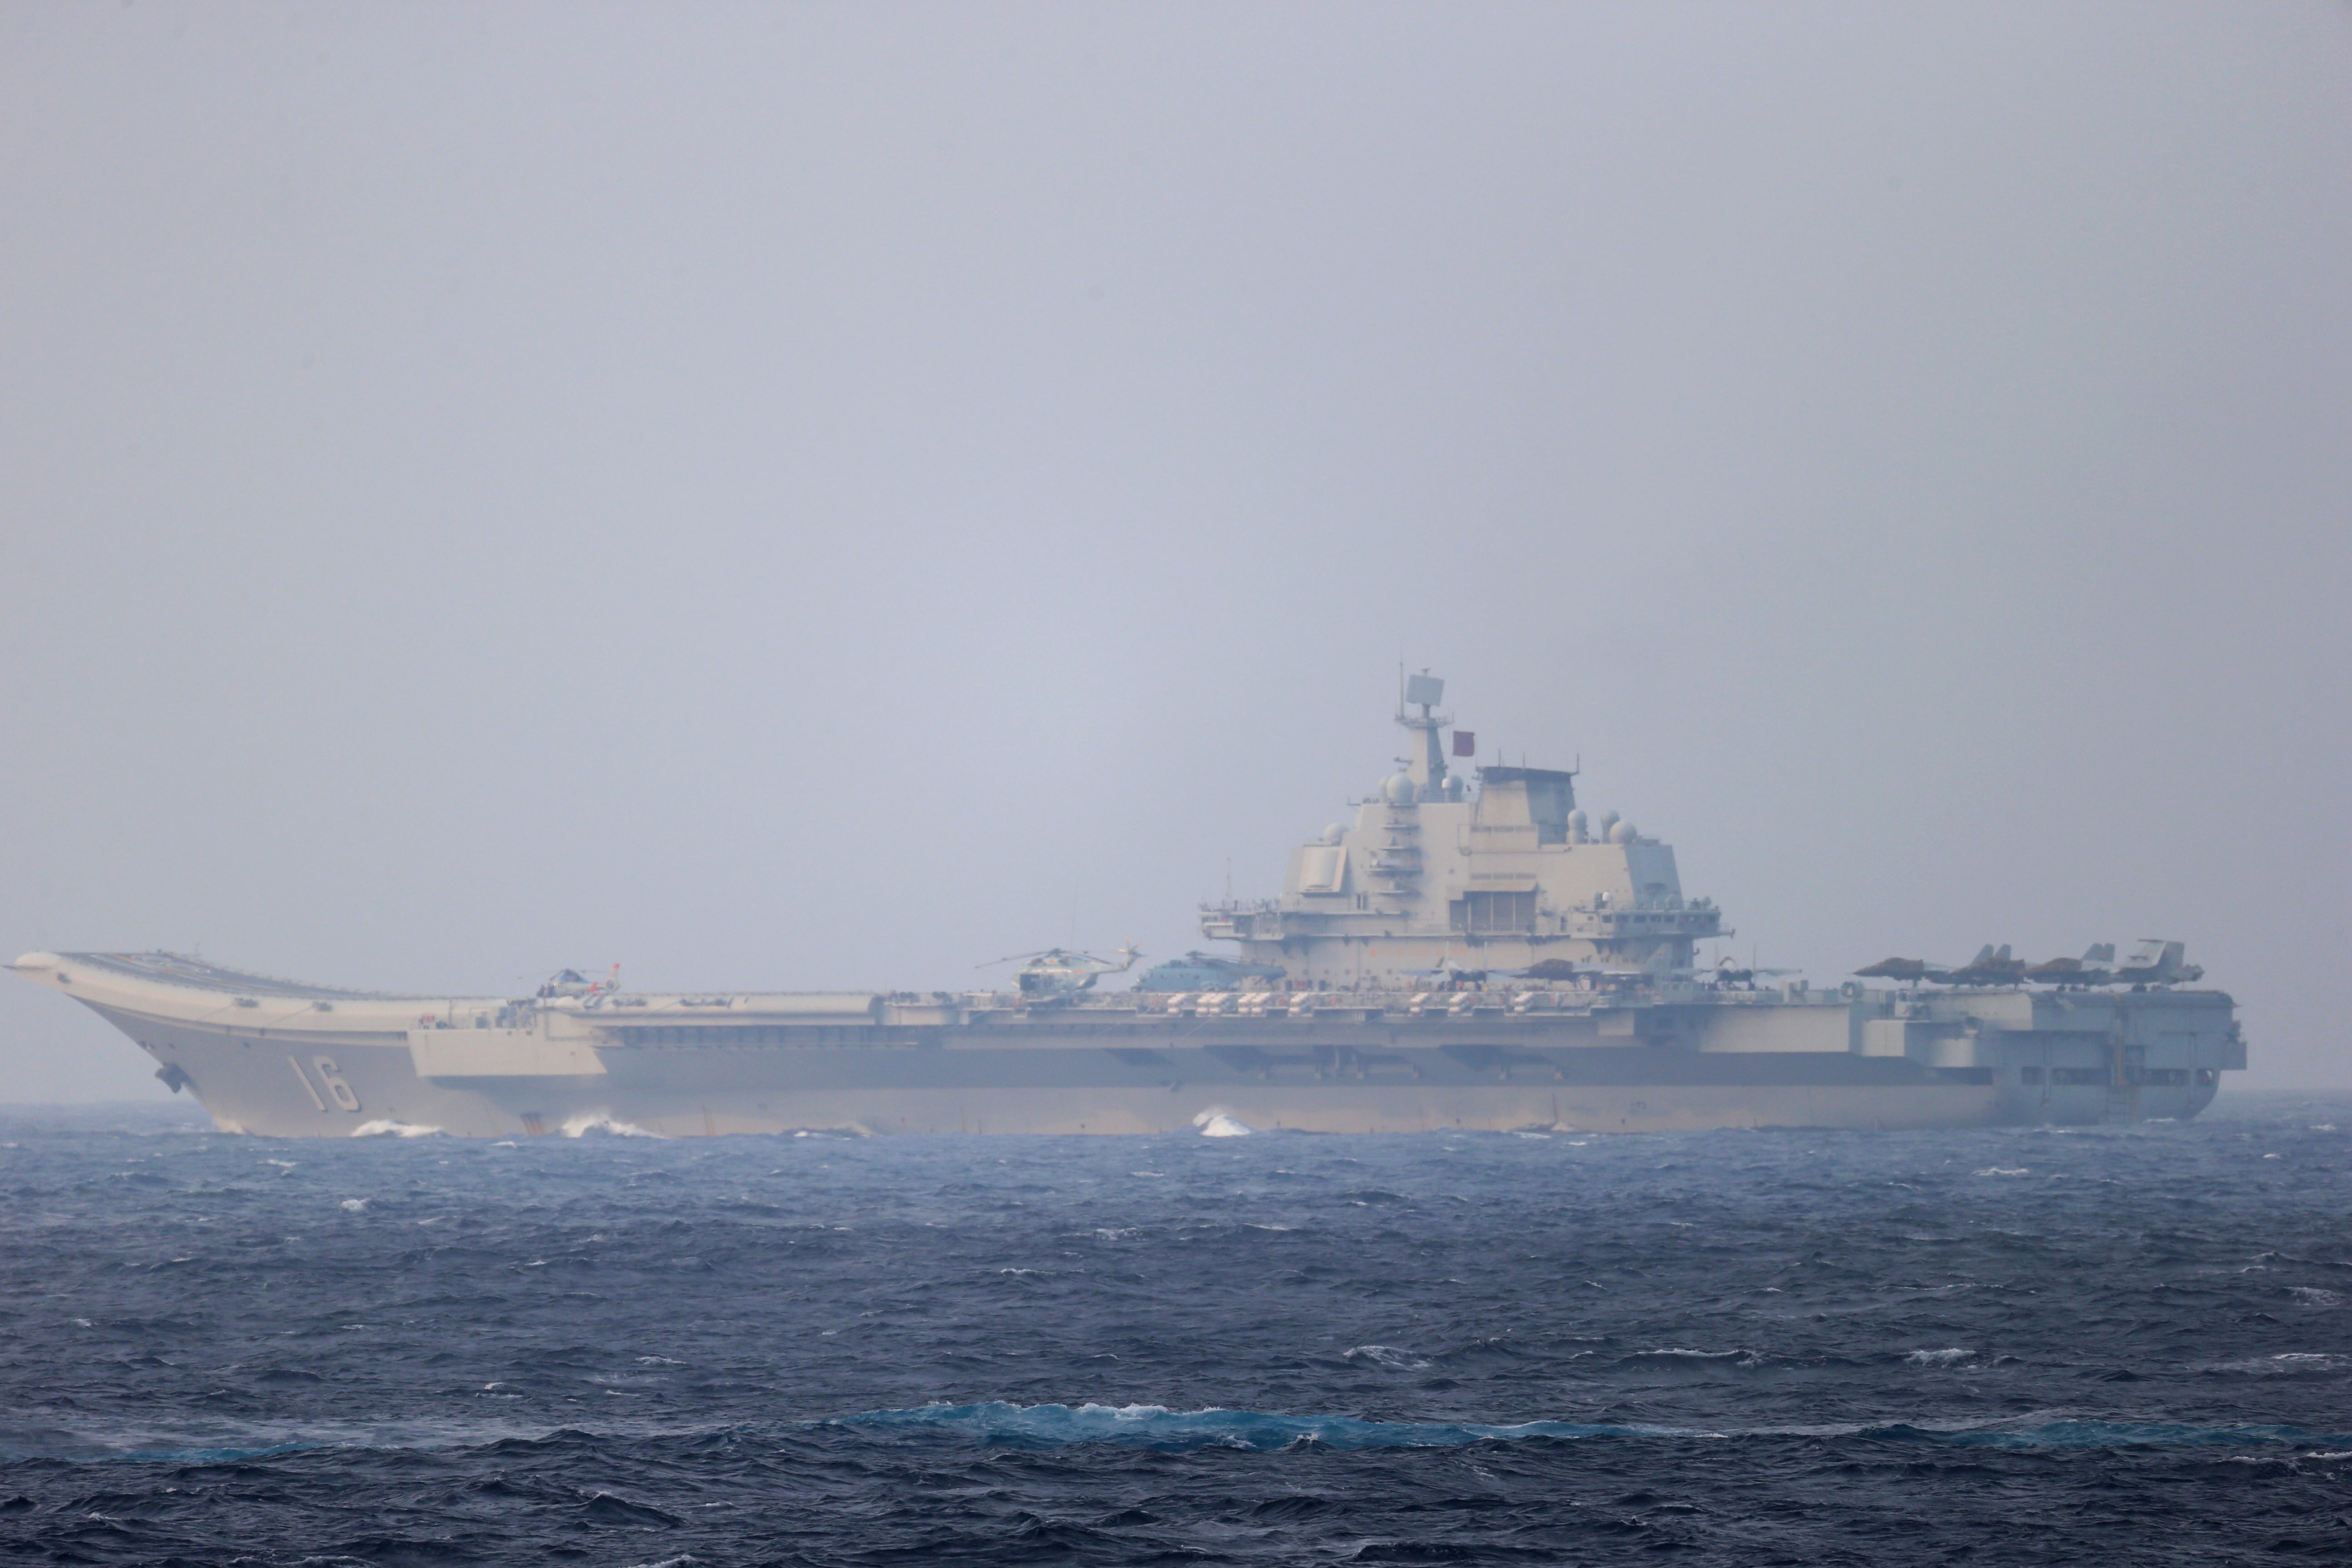 Chinese aircraft carrier Liaoning sails through the Miyako Strait on 4 April, 2021 in this handout photo by the Joint Staff Office of the Defense Ministry of Japan